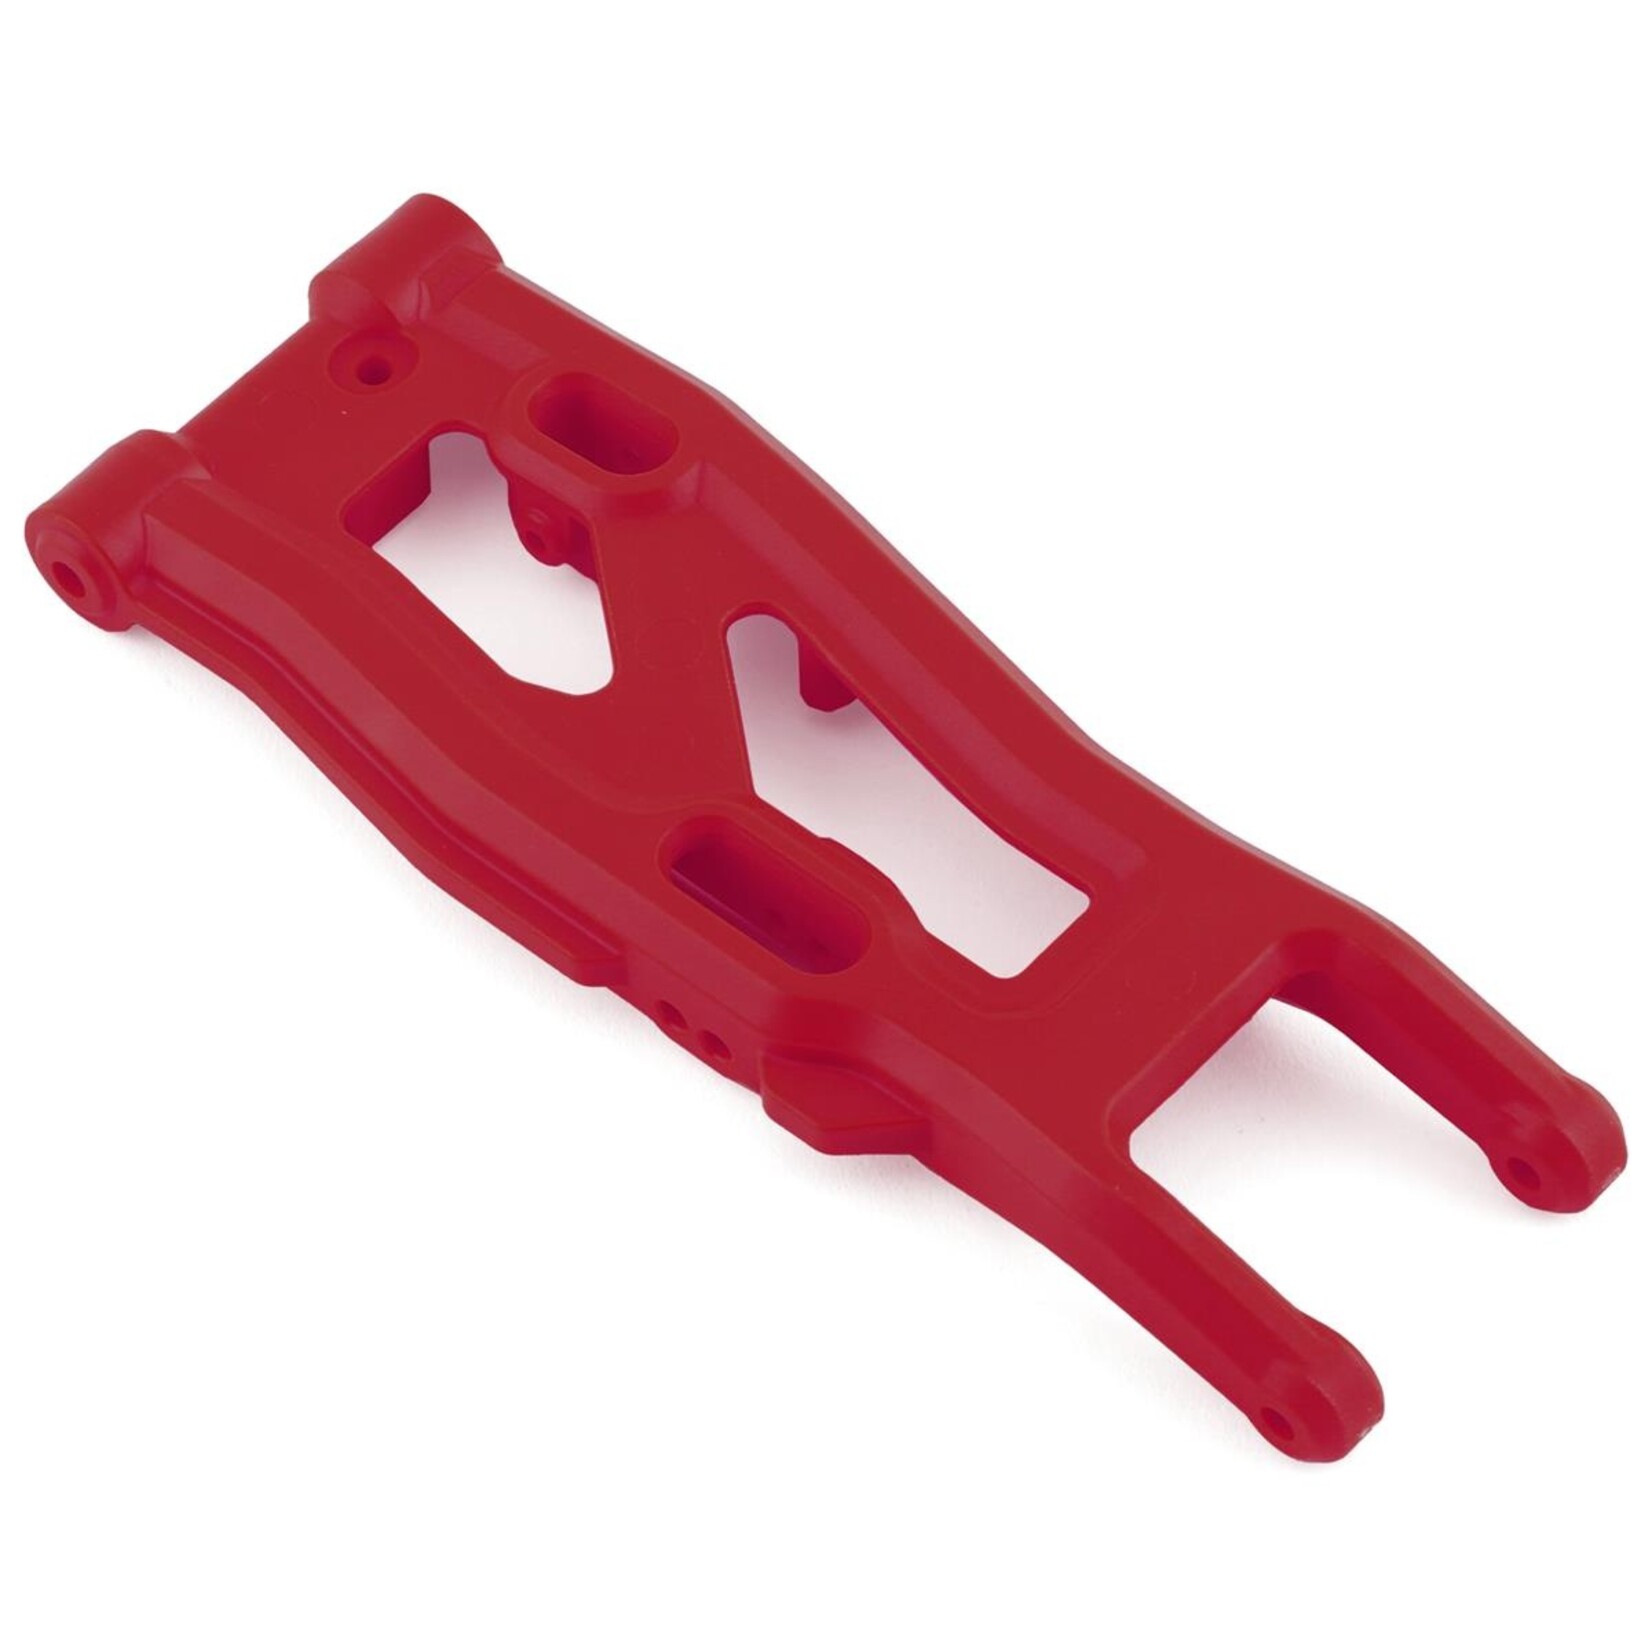 Traxxas Traxxas Sledge Right Front Suspension Arm (Red) #9530R